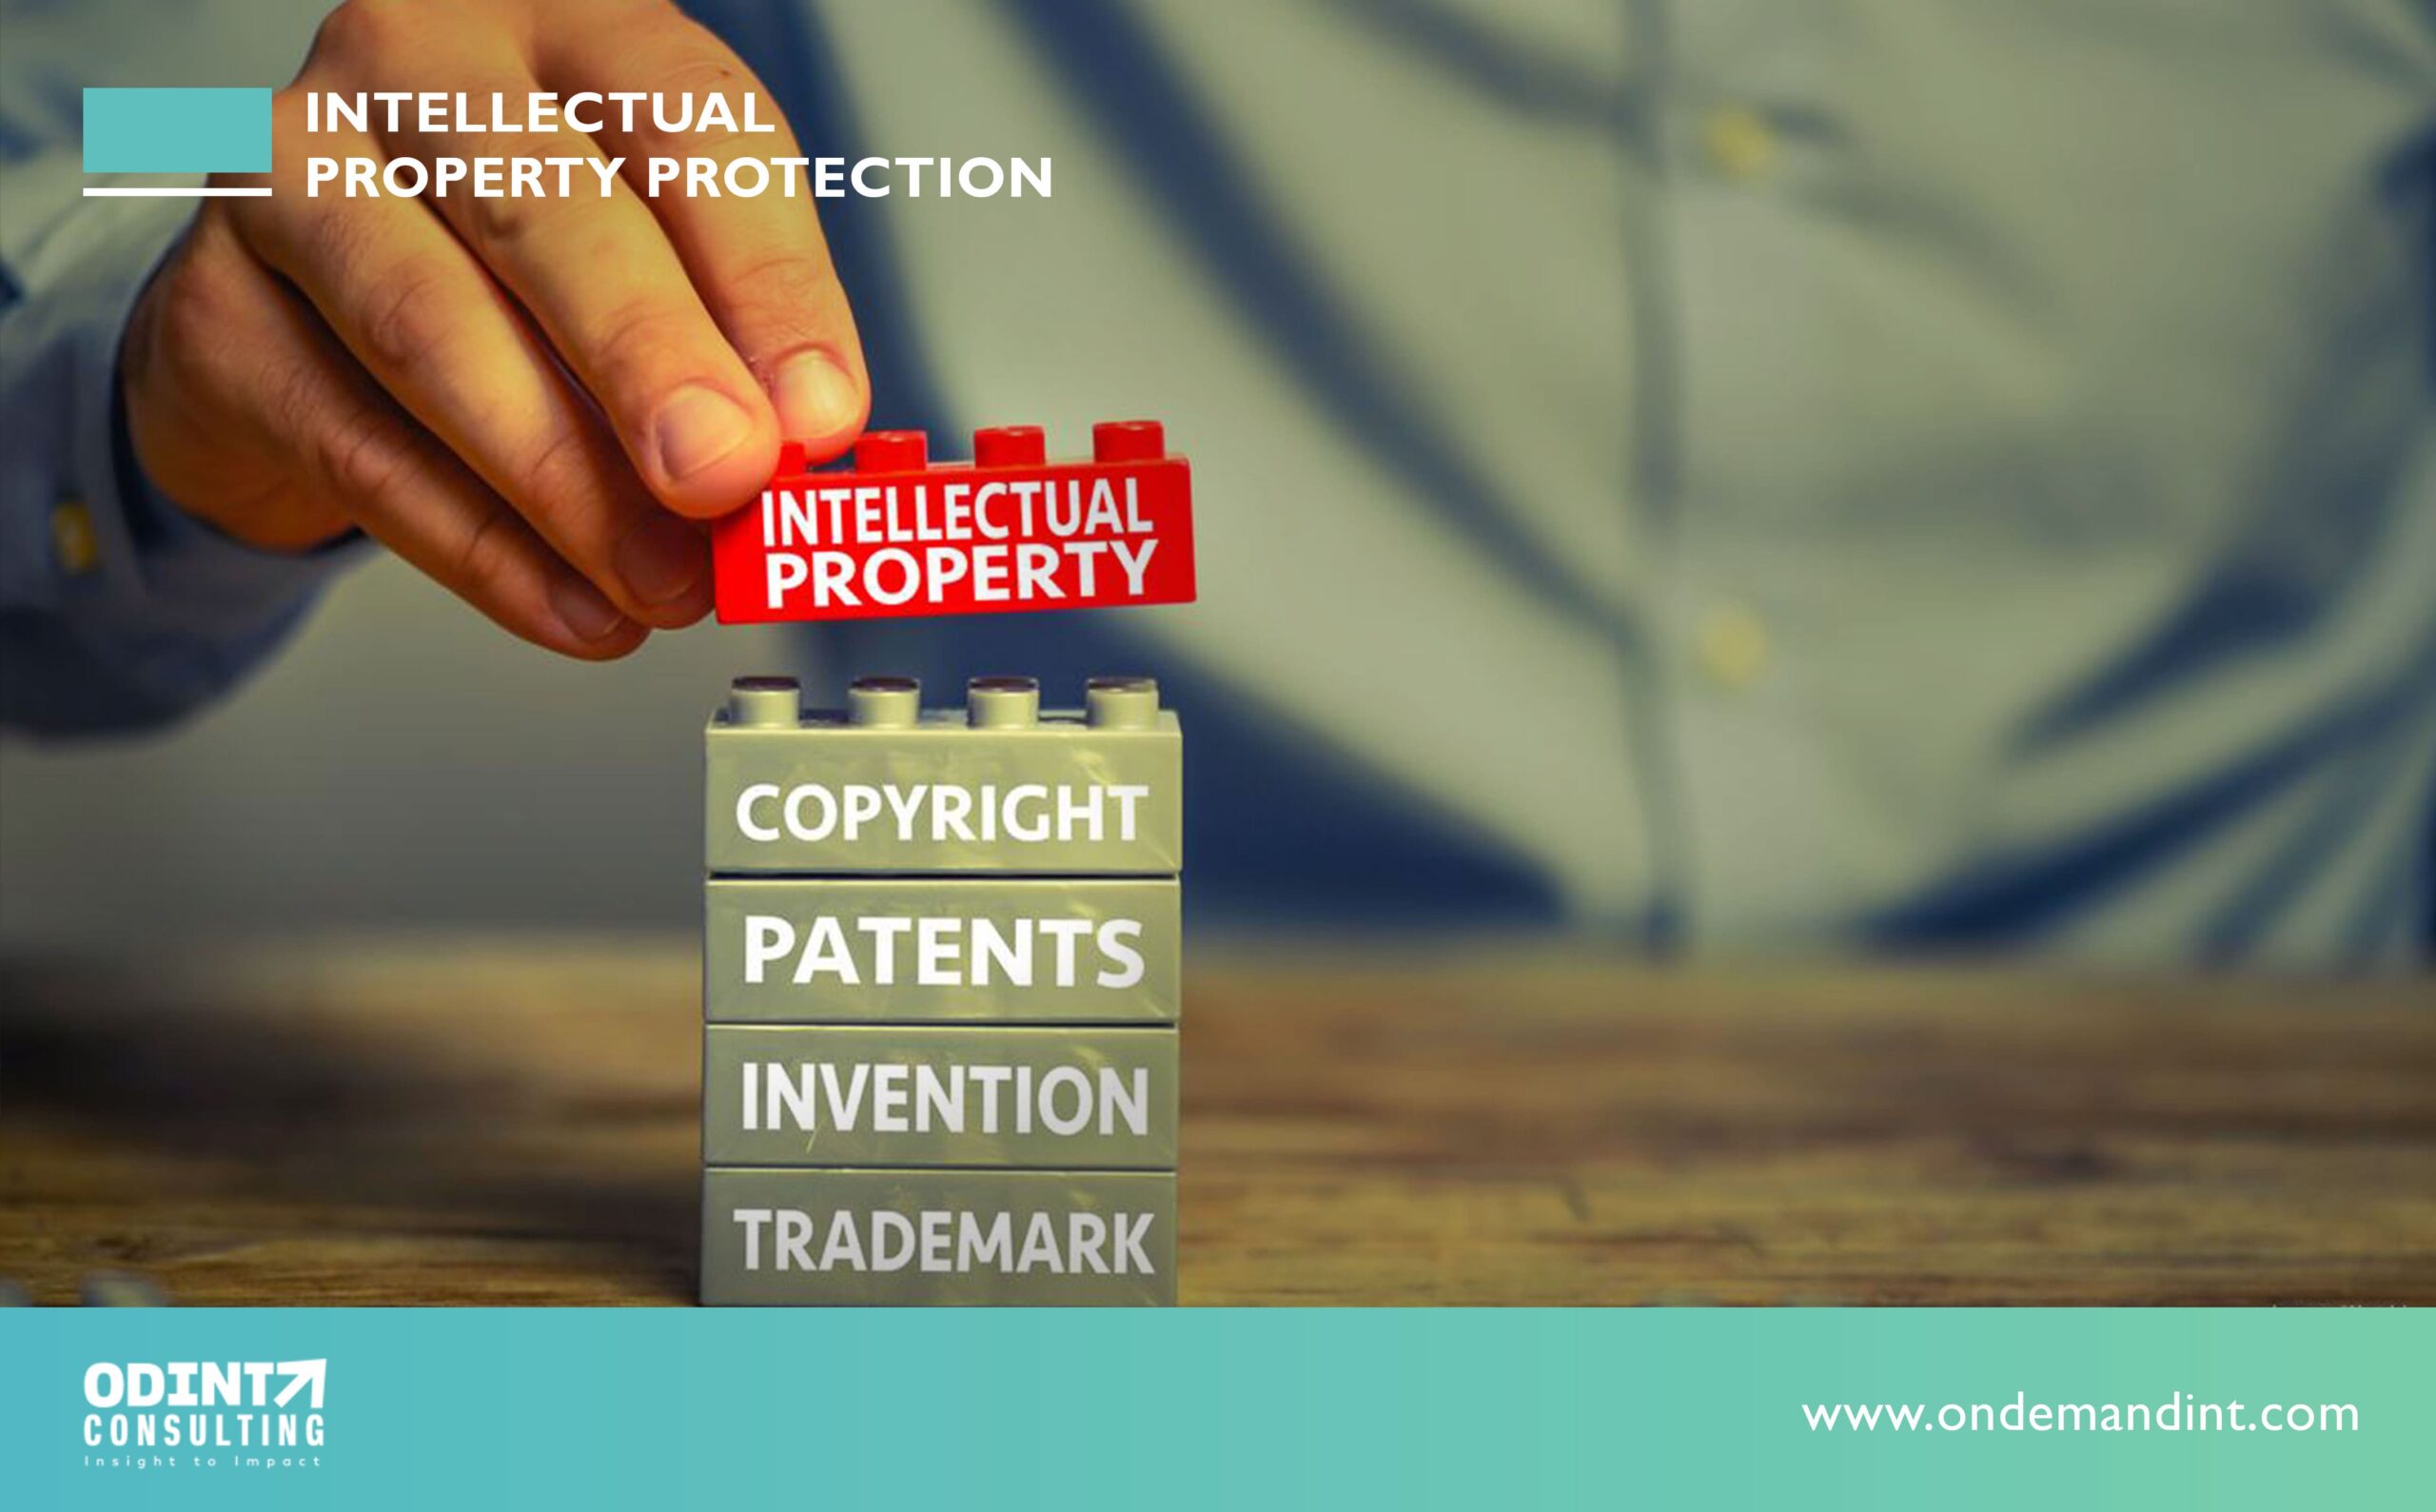 4 Types of Intellectual Property Protection: Brief Significance